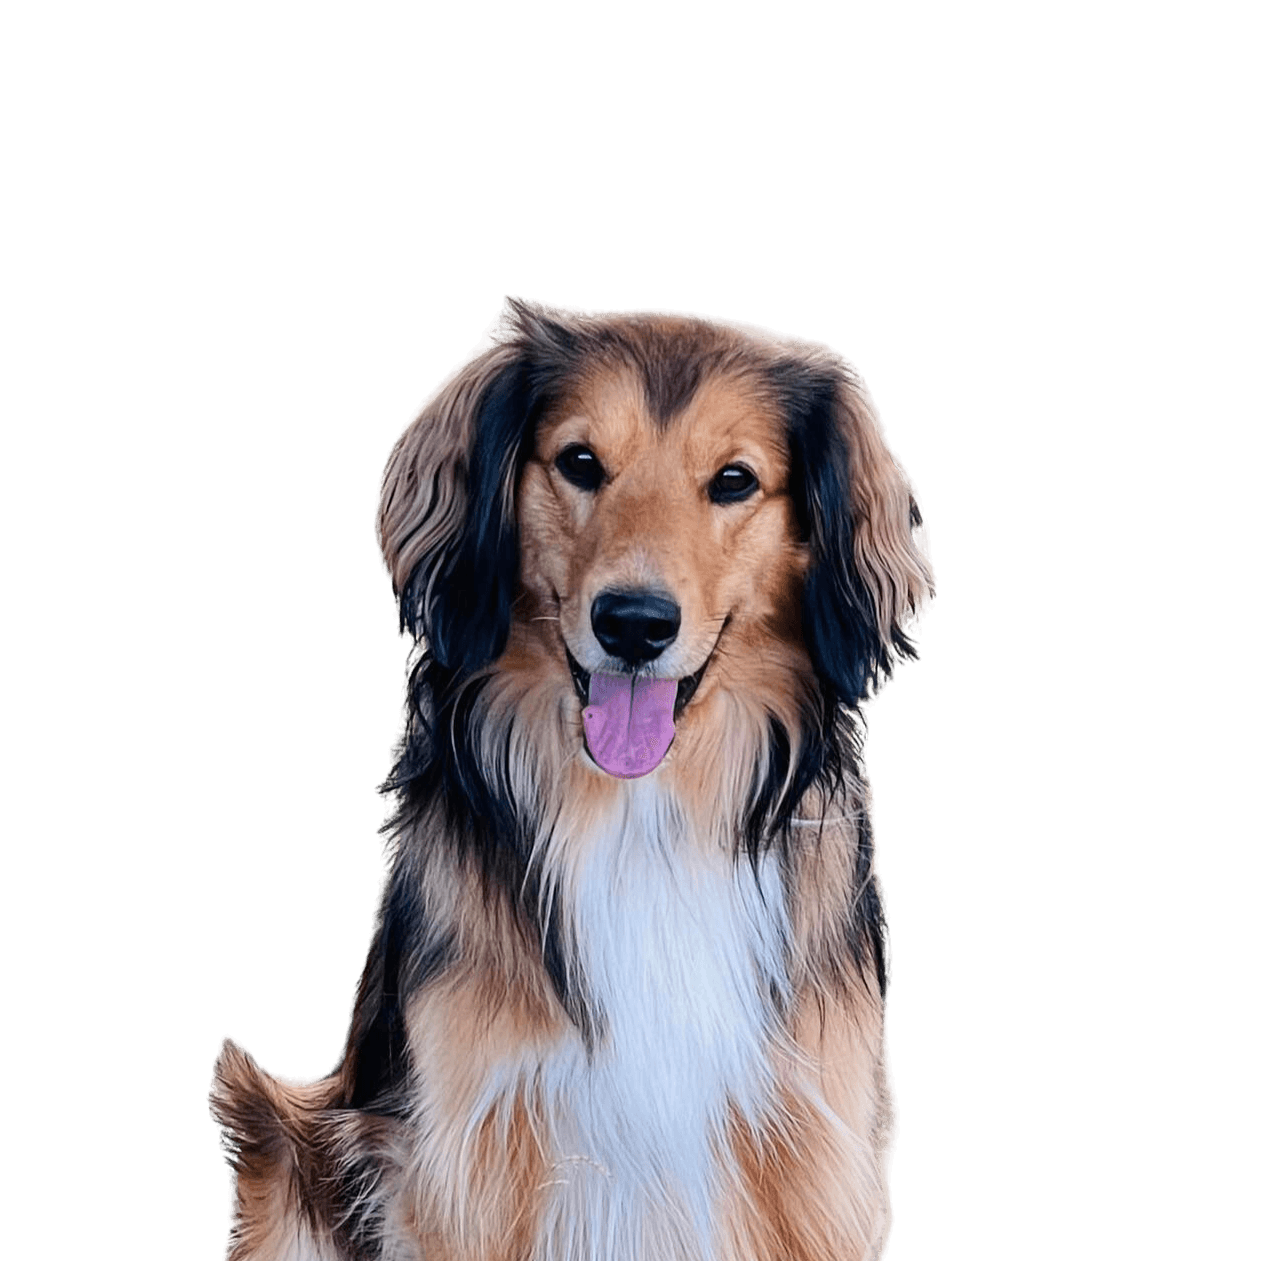 Dog,carnivore,dog breed,companion dog,dog supplies,pet supplies,muzzle,sporting group,coat,canidae,